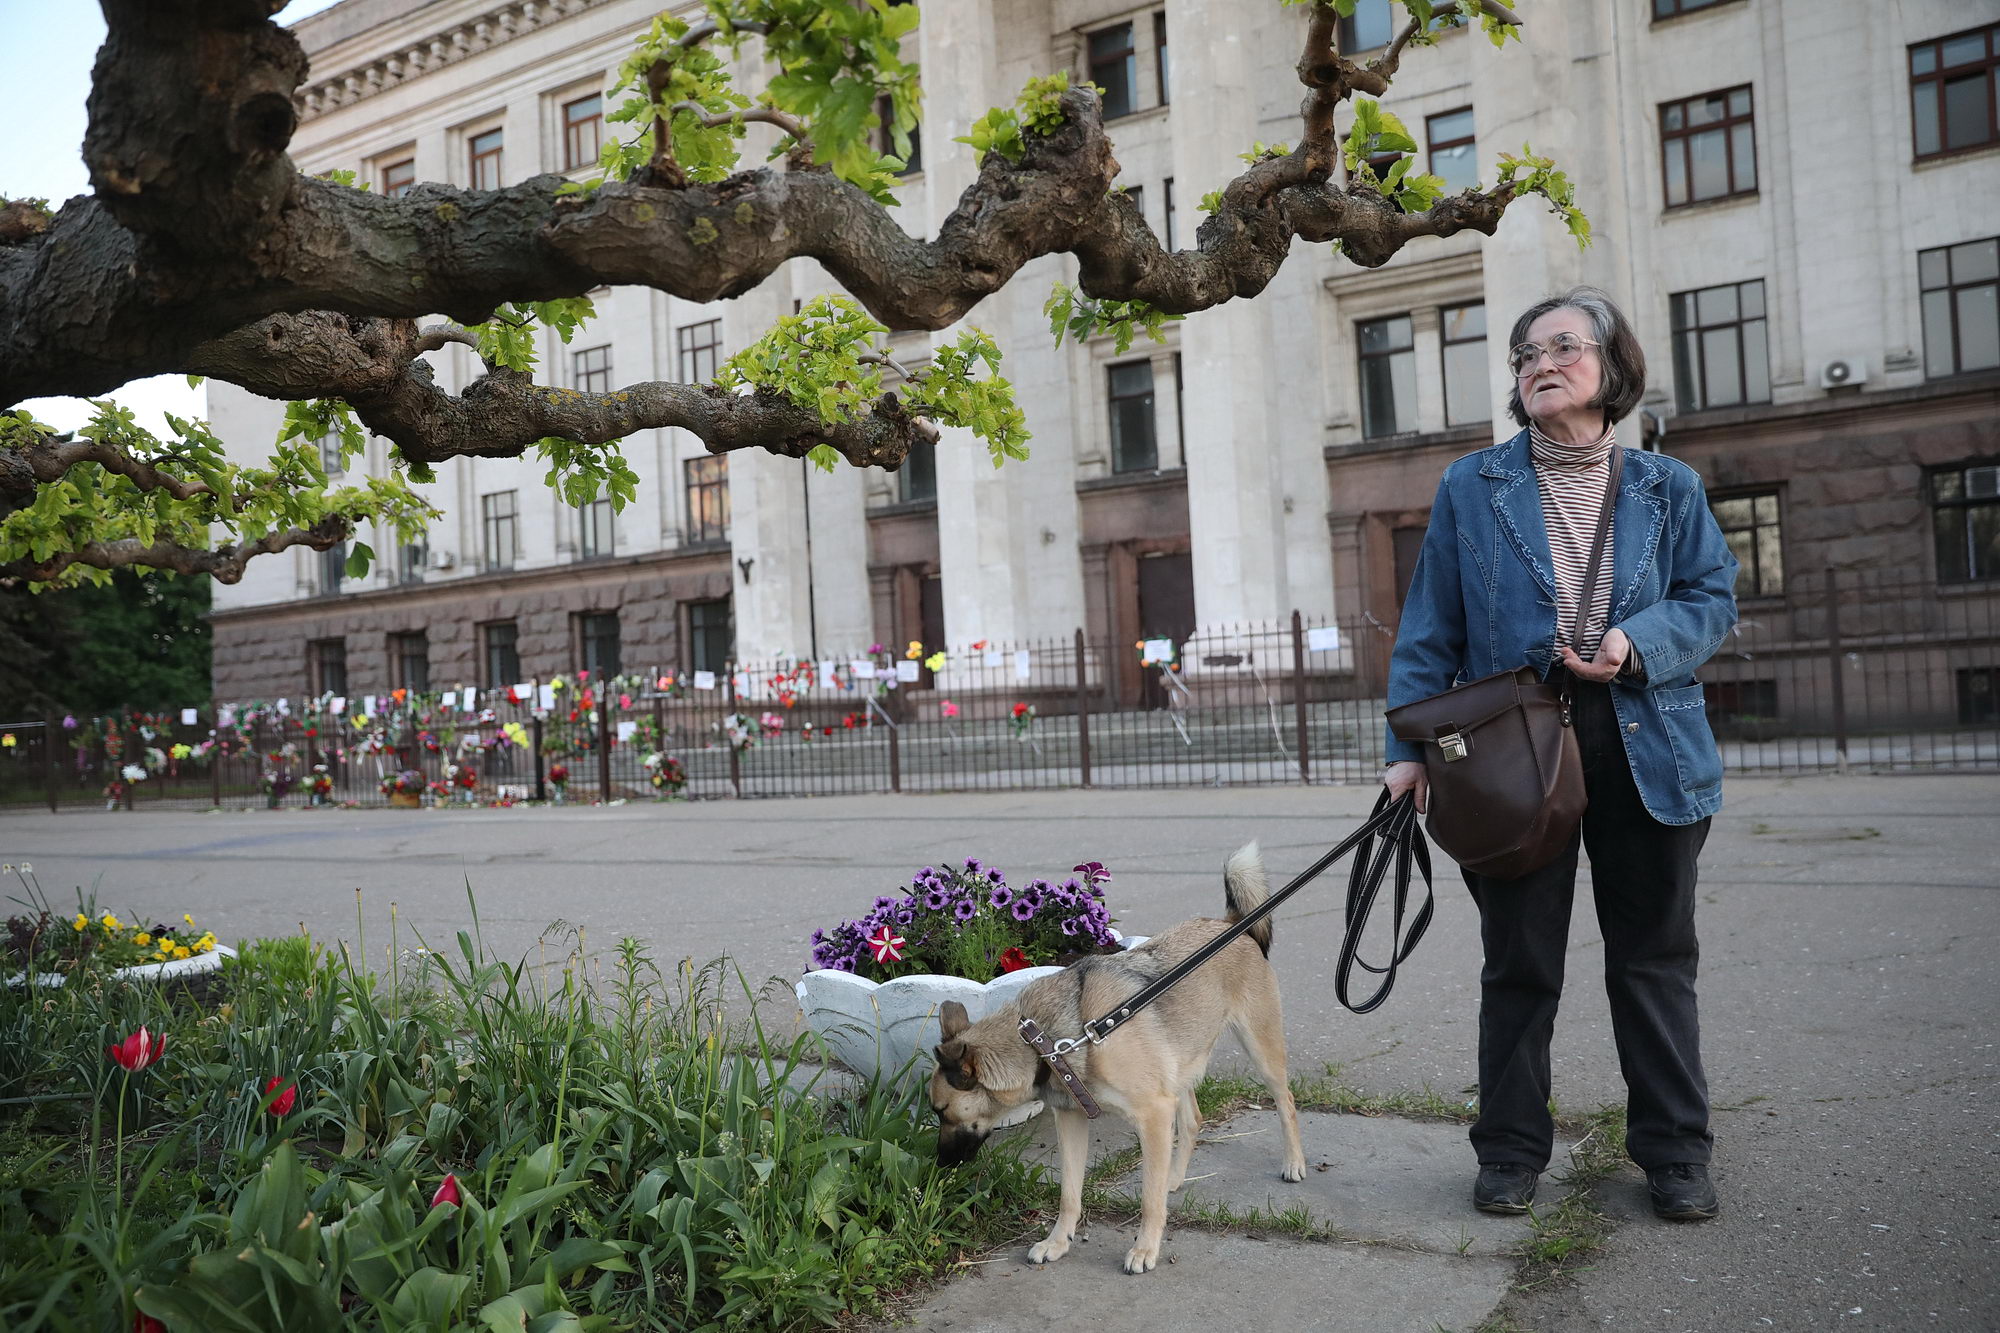 Pro-Russian activist Vera Butuk stands with her dog by the Trade Unions House in Odesa on May 12, 2019. She comes here almost every day to lit the candles in memory of 42 people who were killed by fire in that building on May 2, 2014. Butuk is one of the survivors from that fire.